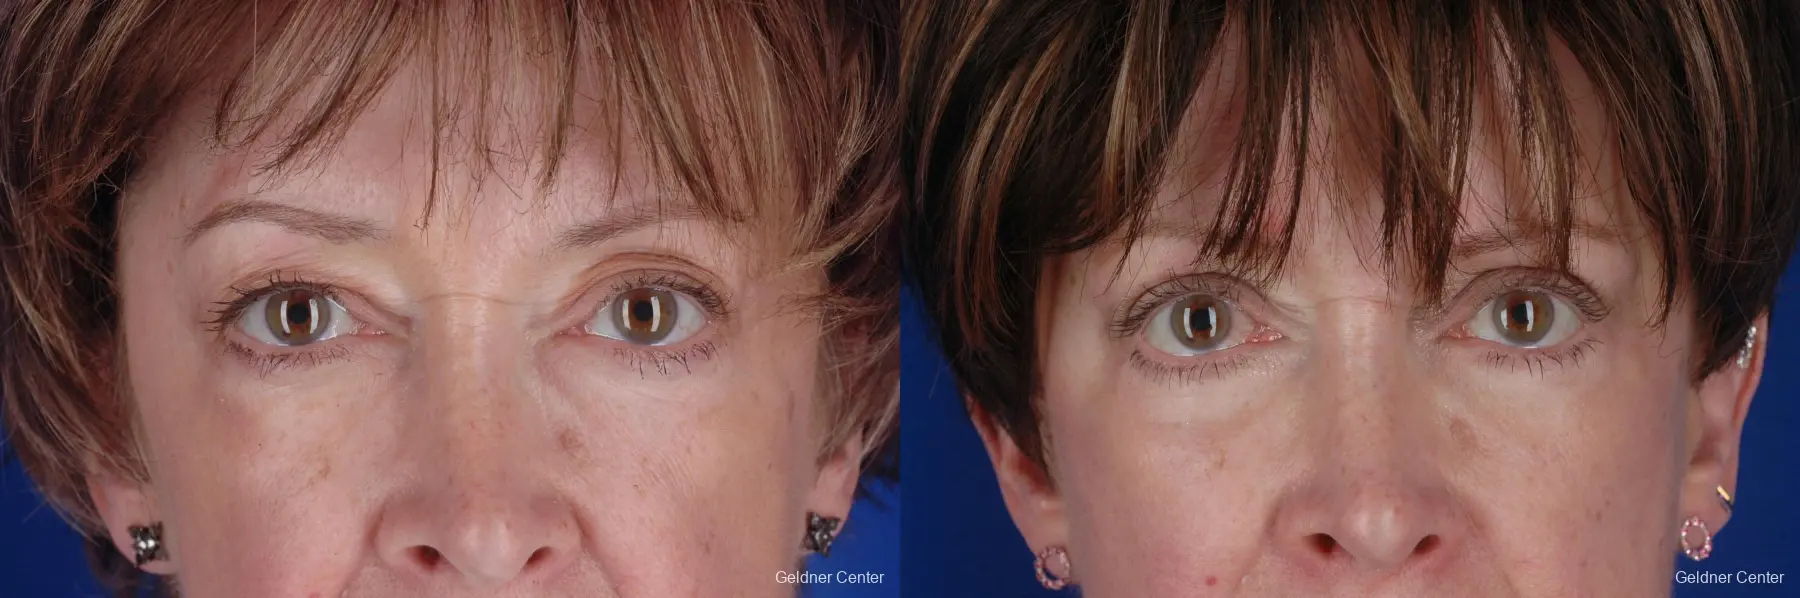 59 year old woman, upper and lower lid blepharoplasty - Before and After